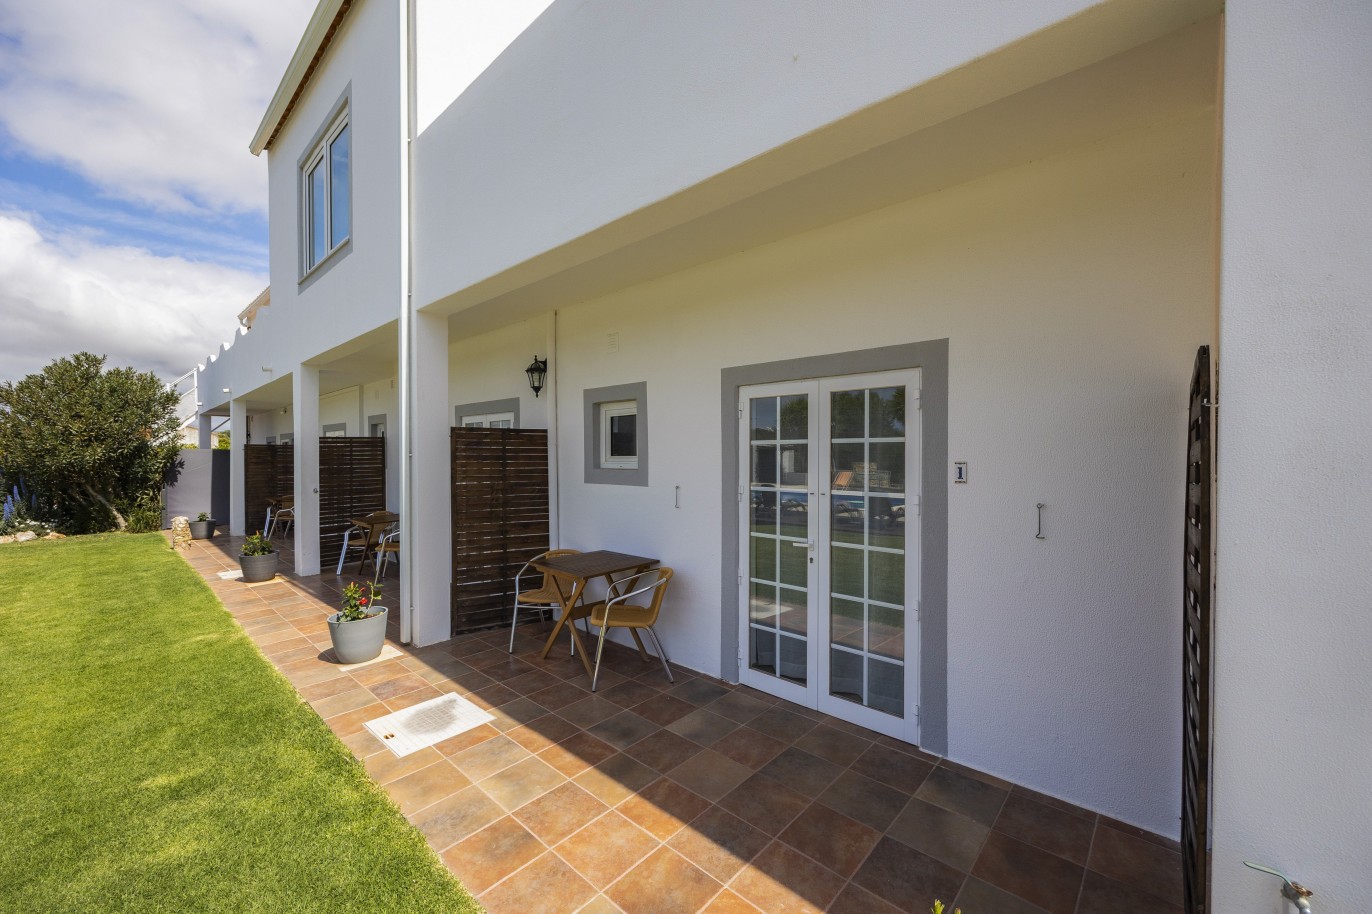 Property with 10 bedrooms for sale in Lagoa, Algarve_237265